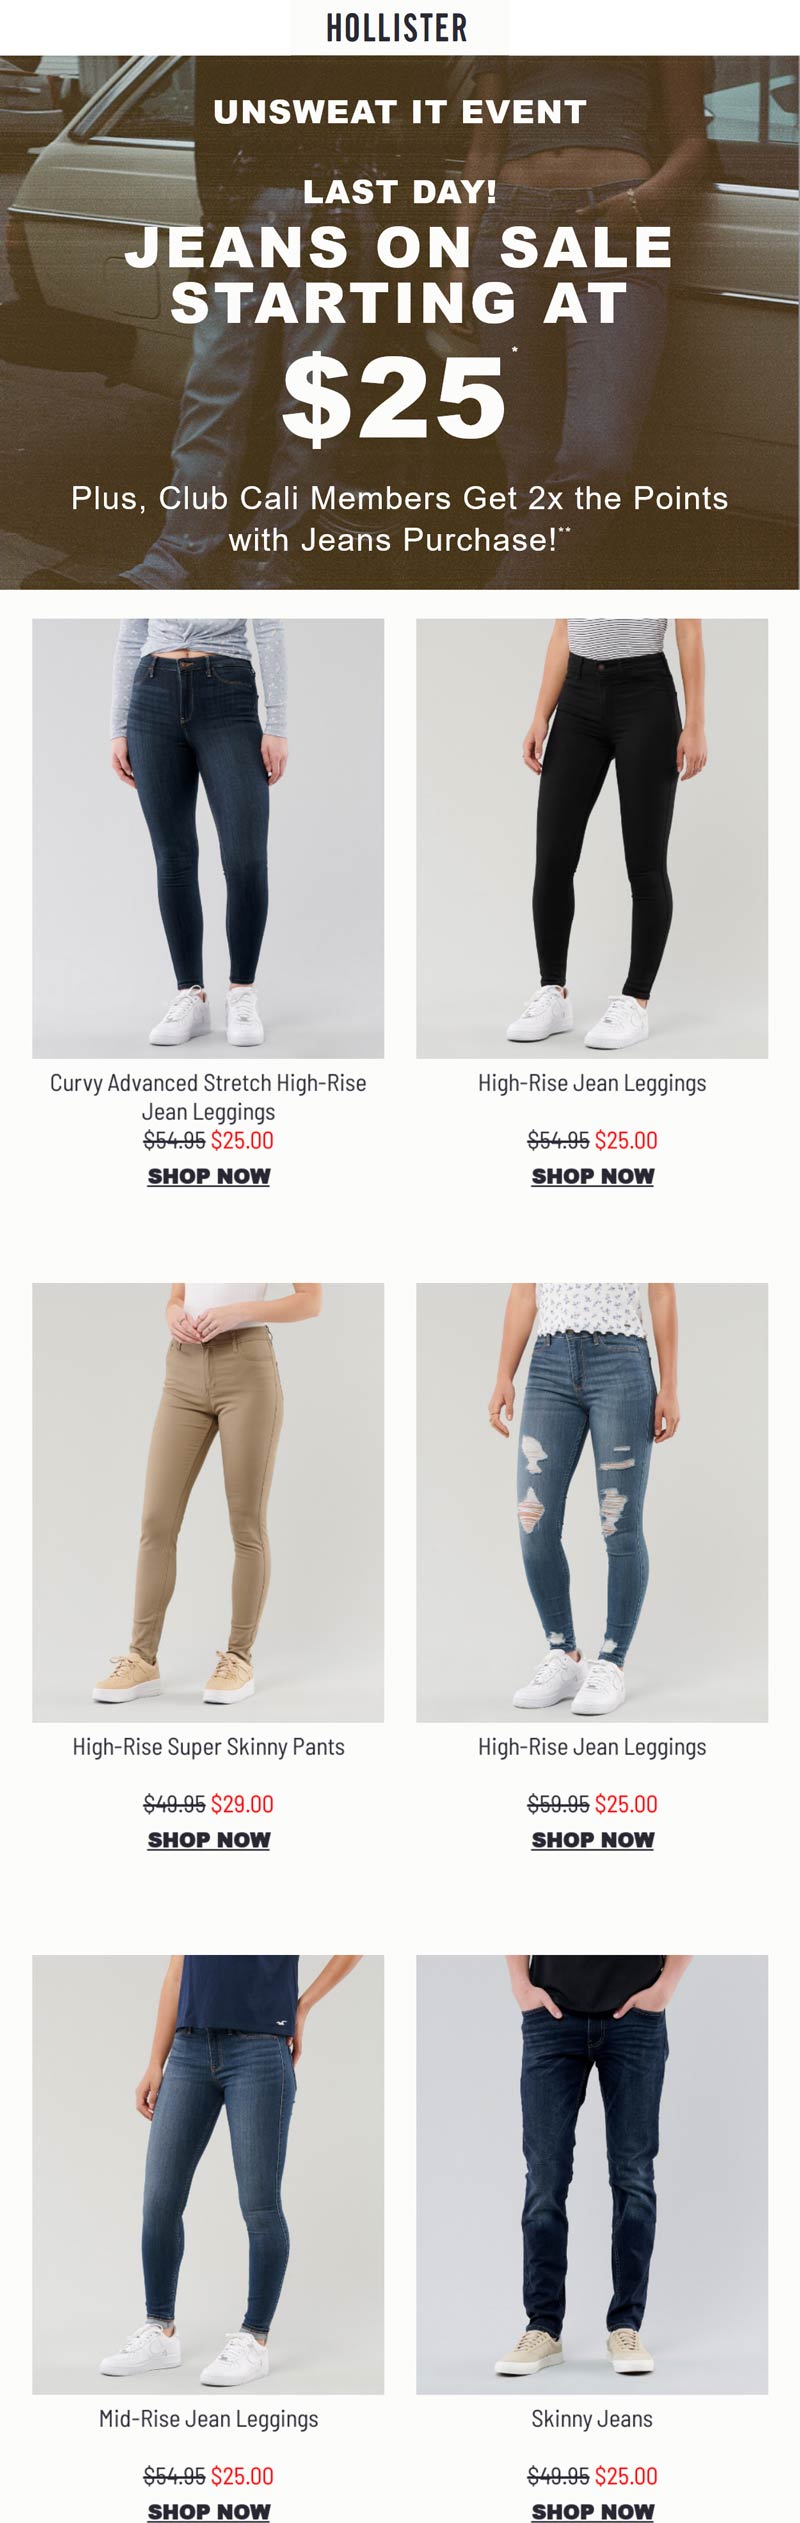 Hollister stores Coupon  Various $25 jeans today at Hollister #hollister 